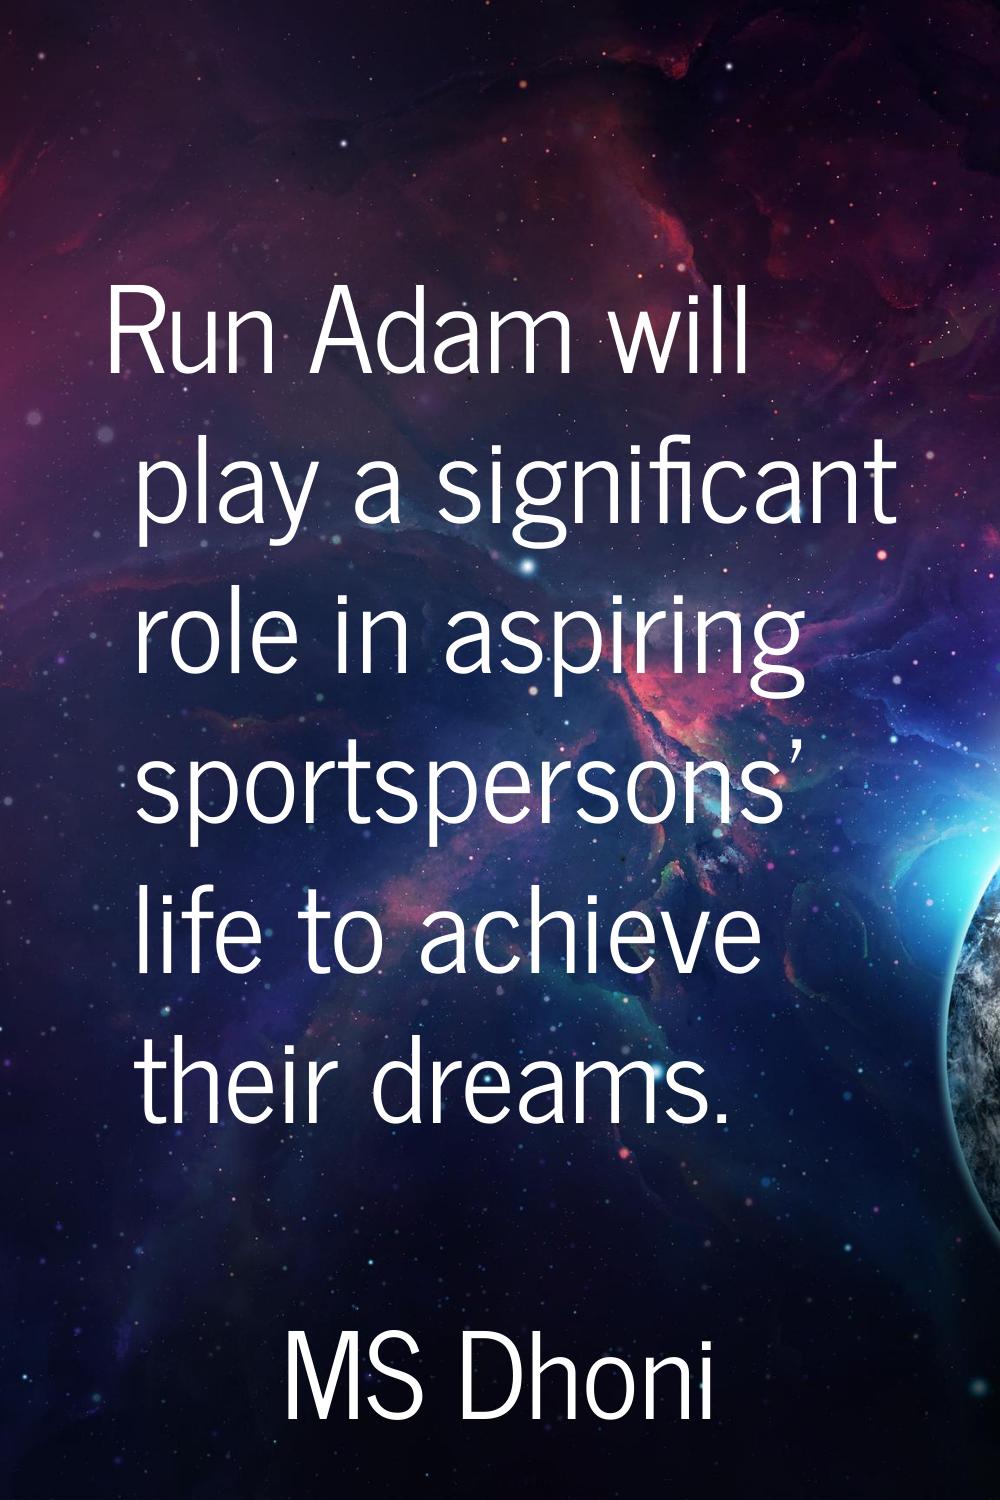 Run Adam will play a significant role in aspiring sportspersons' life to achieve their dreams.